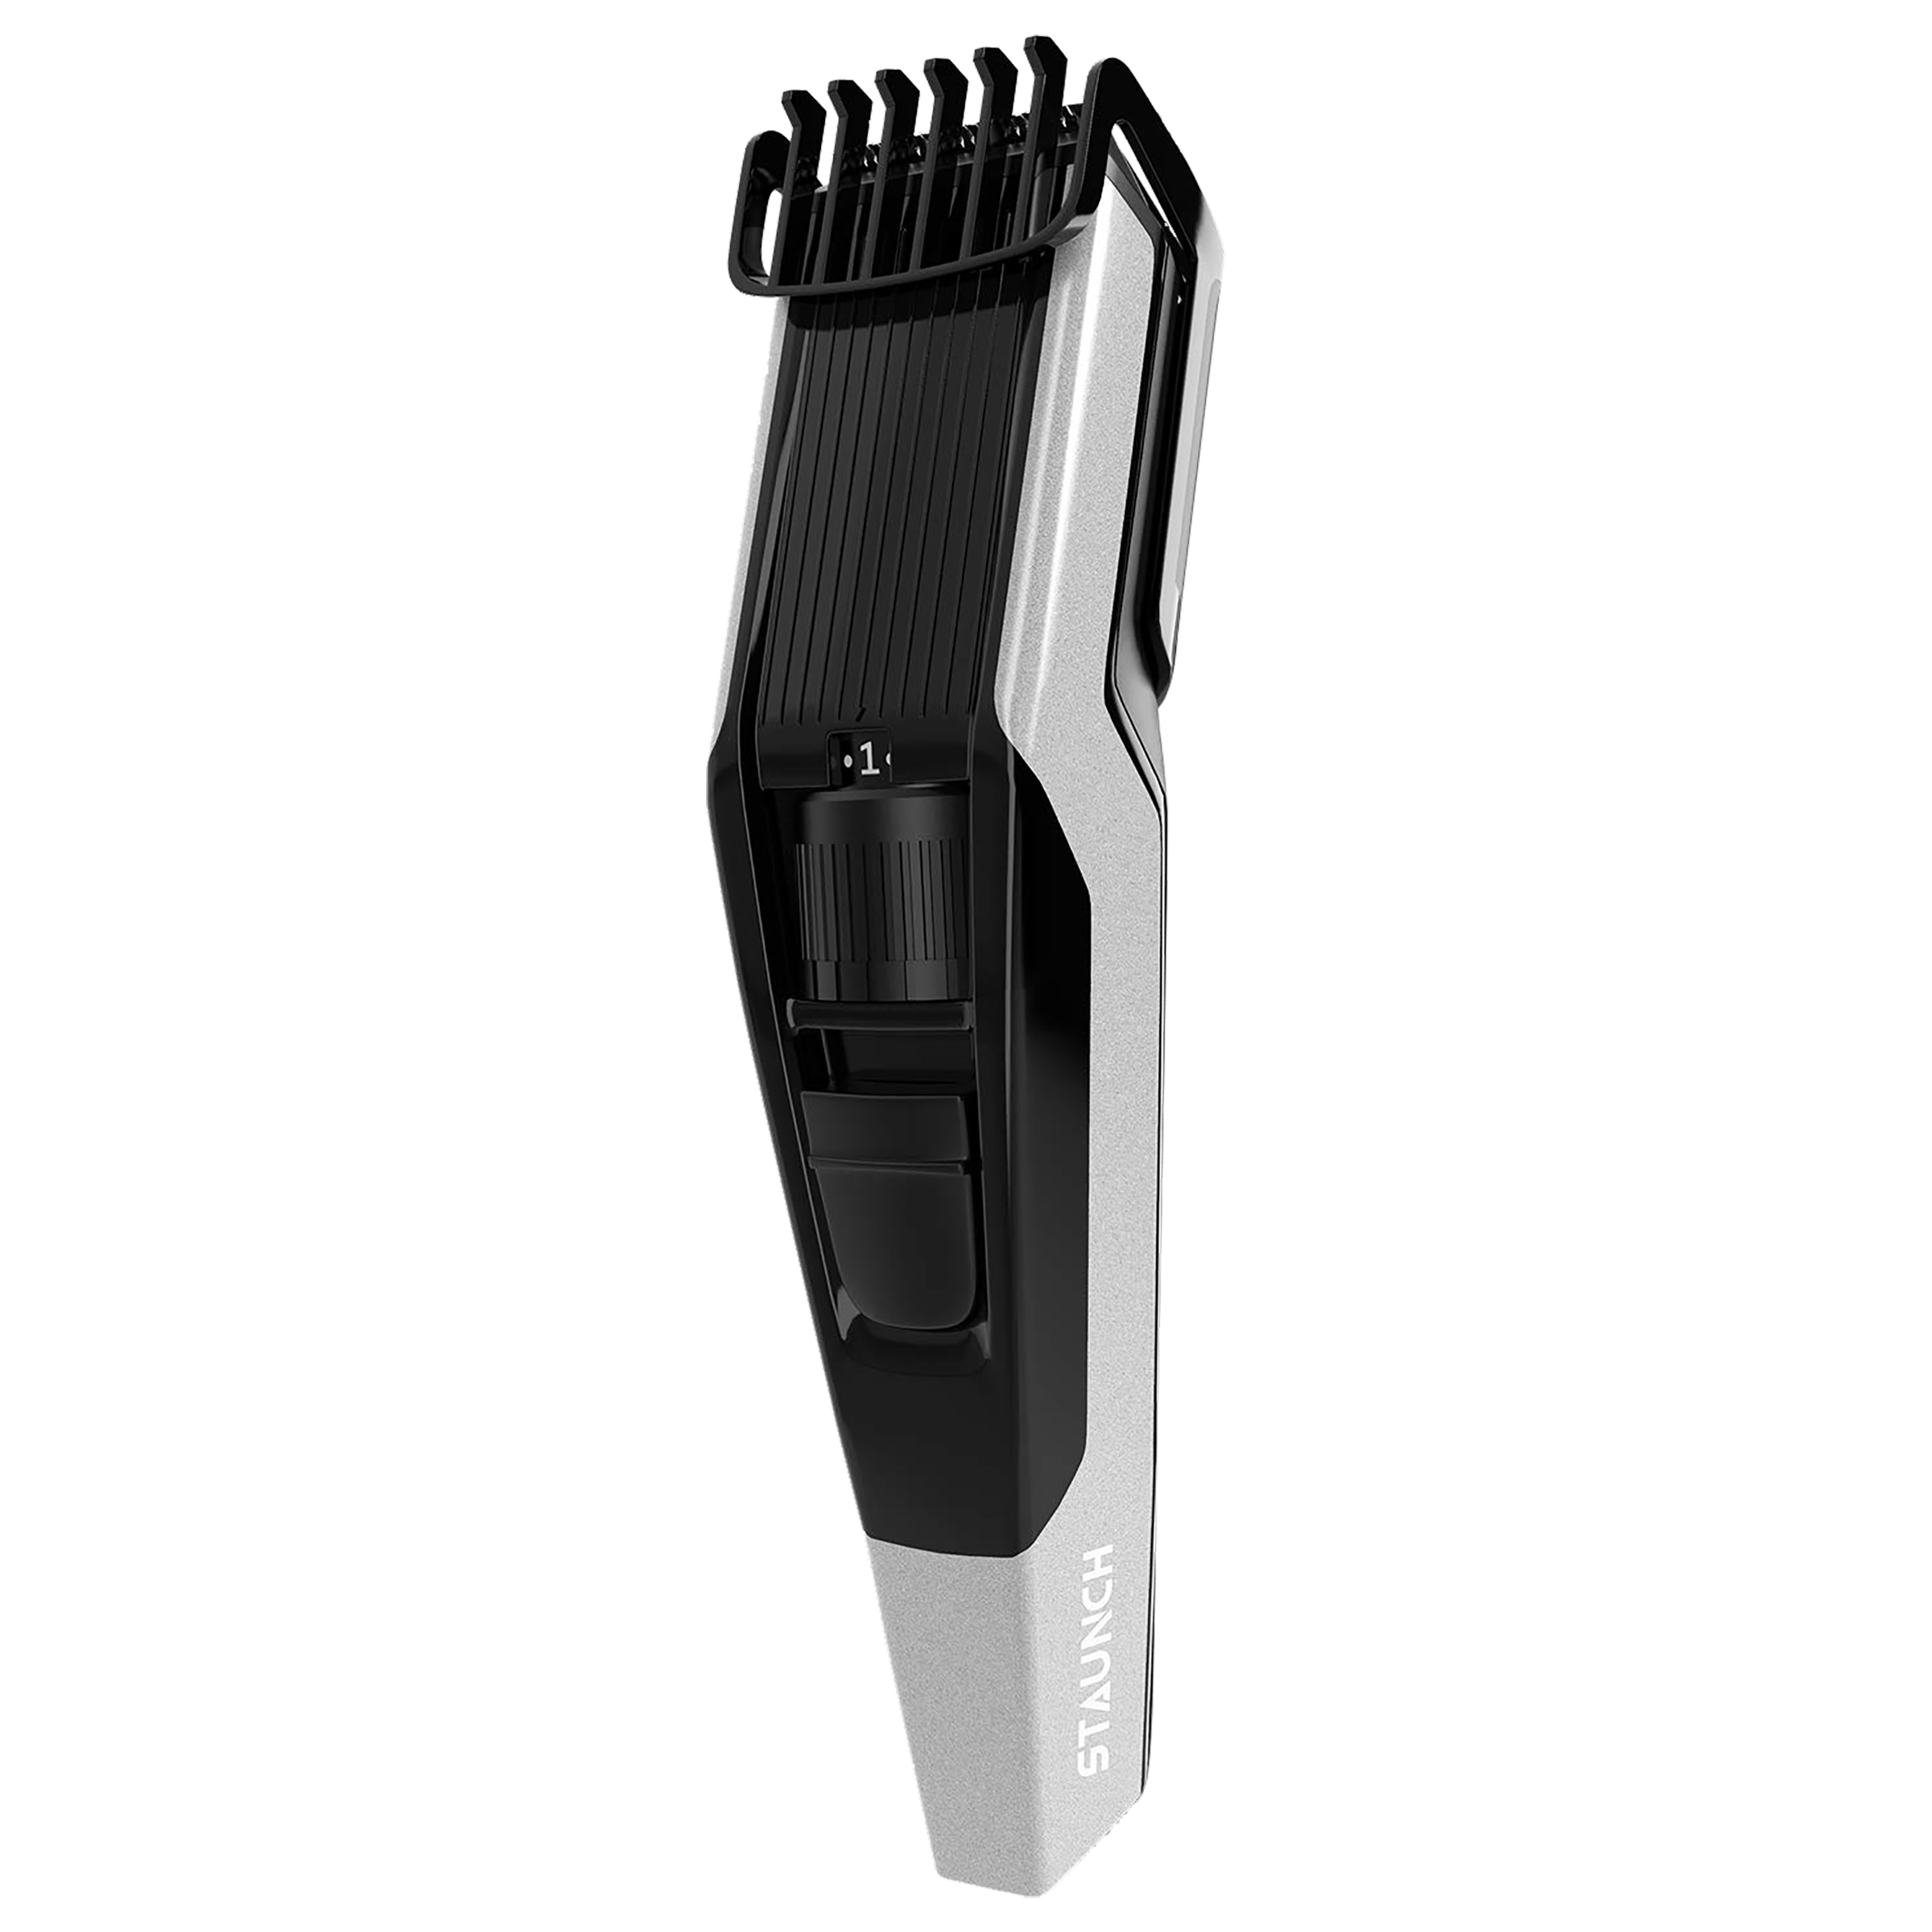 Staunch - Staunch Stainless Steel Blades Cordless Operation Trimmer (Skin Friendly Performance, SBT3011, Black/Silver)